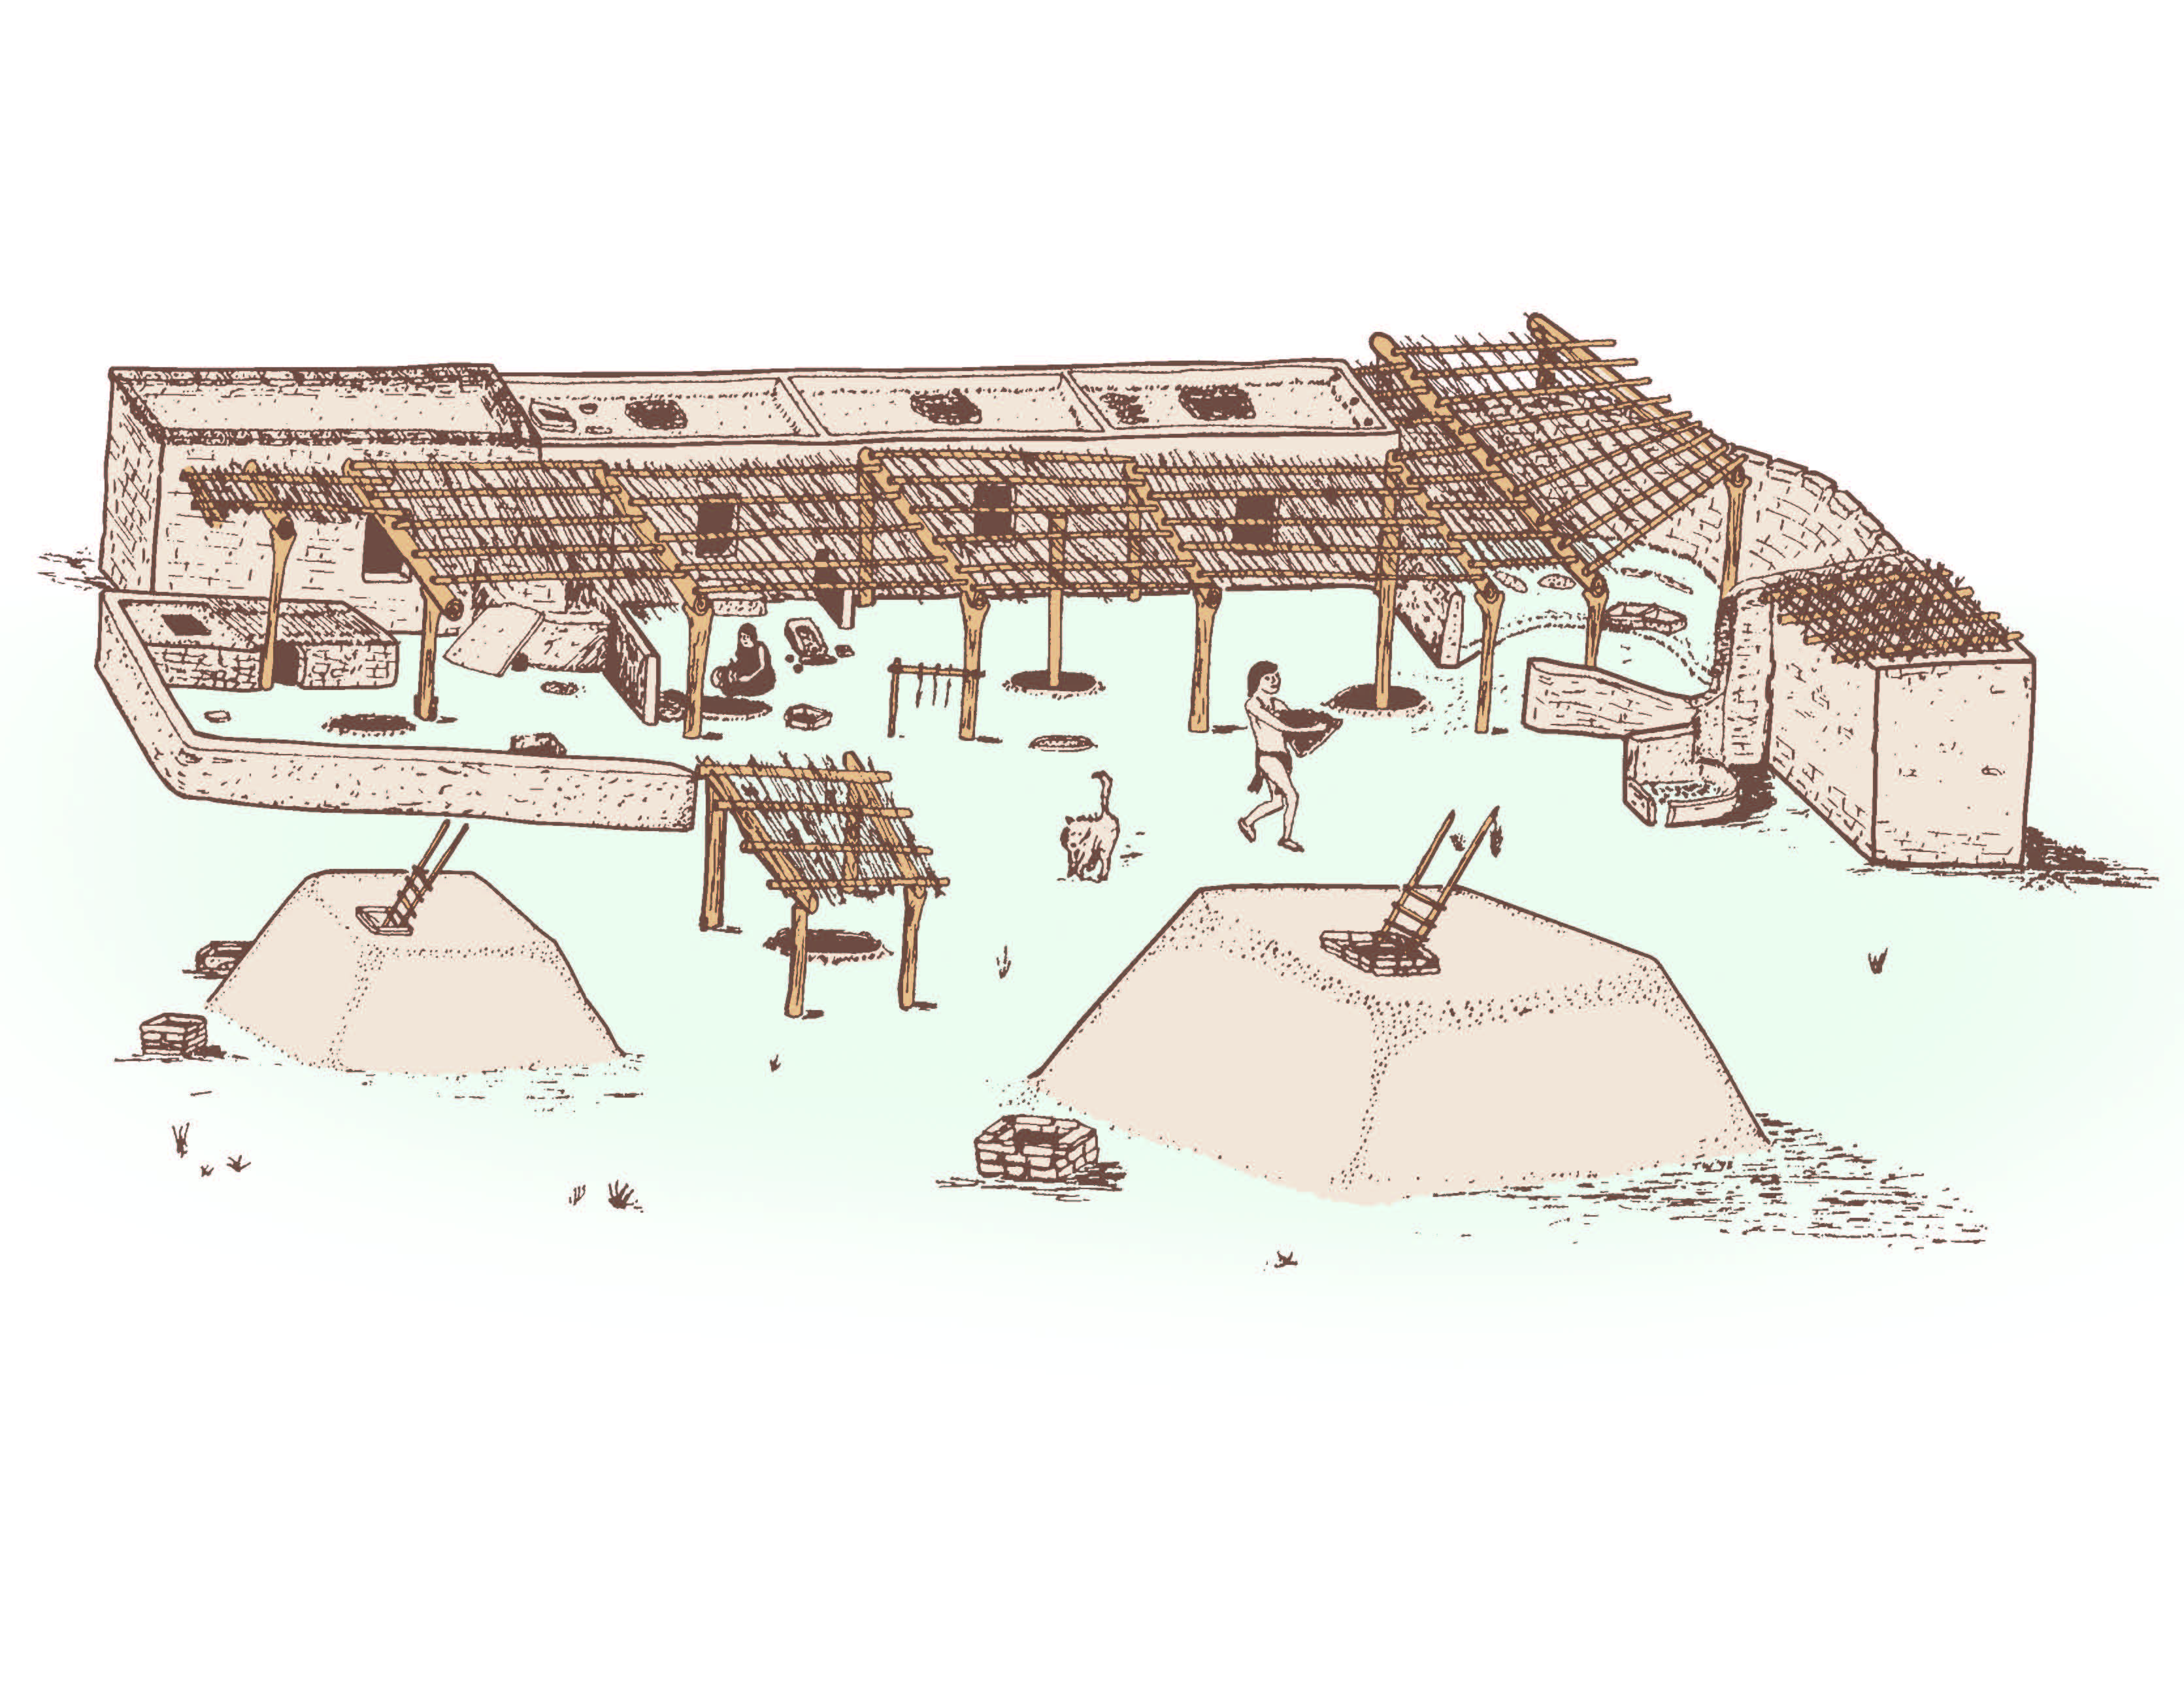 The Spadefoot Toad Site at the Fajada Gap Community in Chaco Canyon as it might have looked ca. AD 1000. Illustration by Thomas C. Windes.